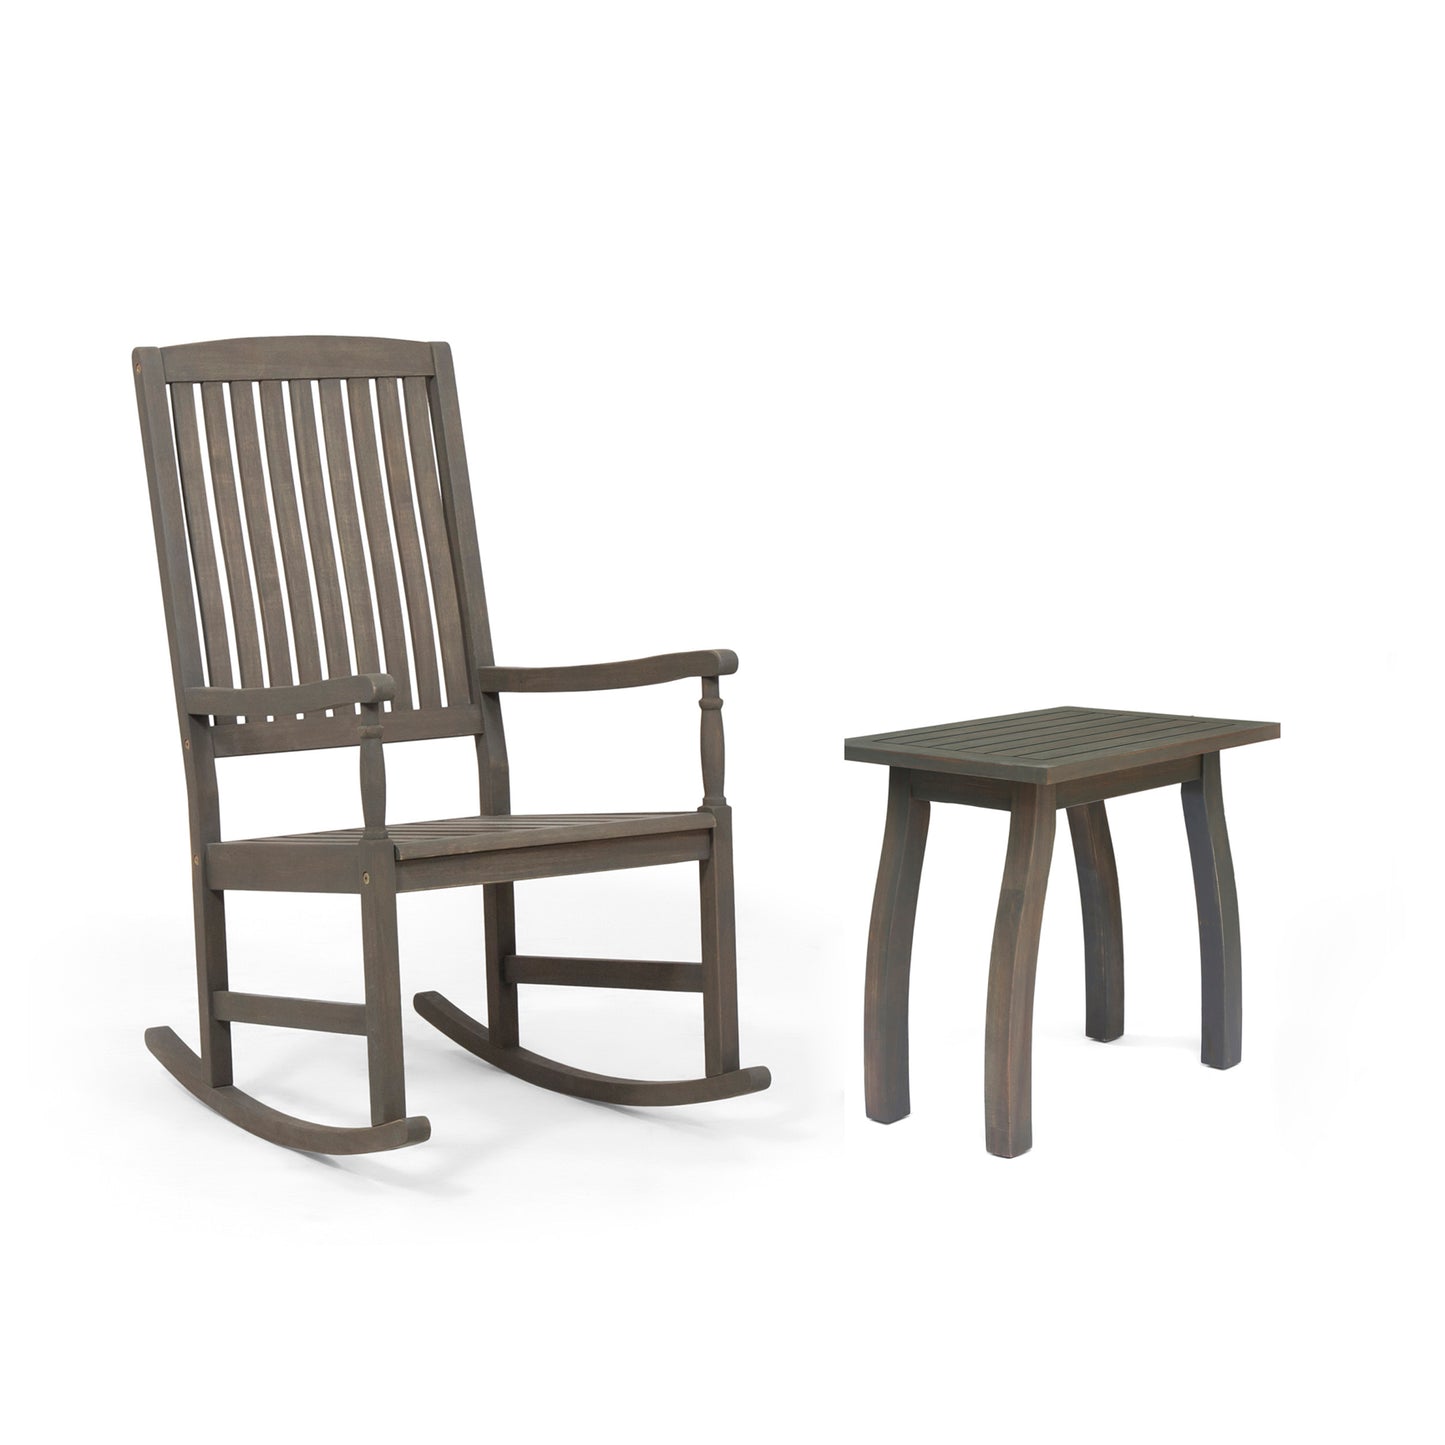 Tobey Outdoor Acacia Wood Rocking Chair and Side Table Set